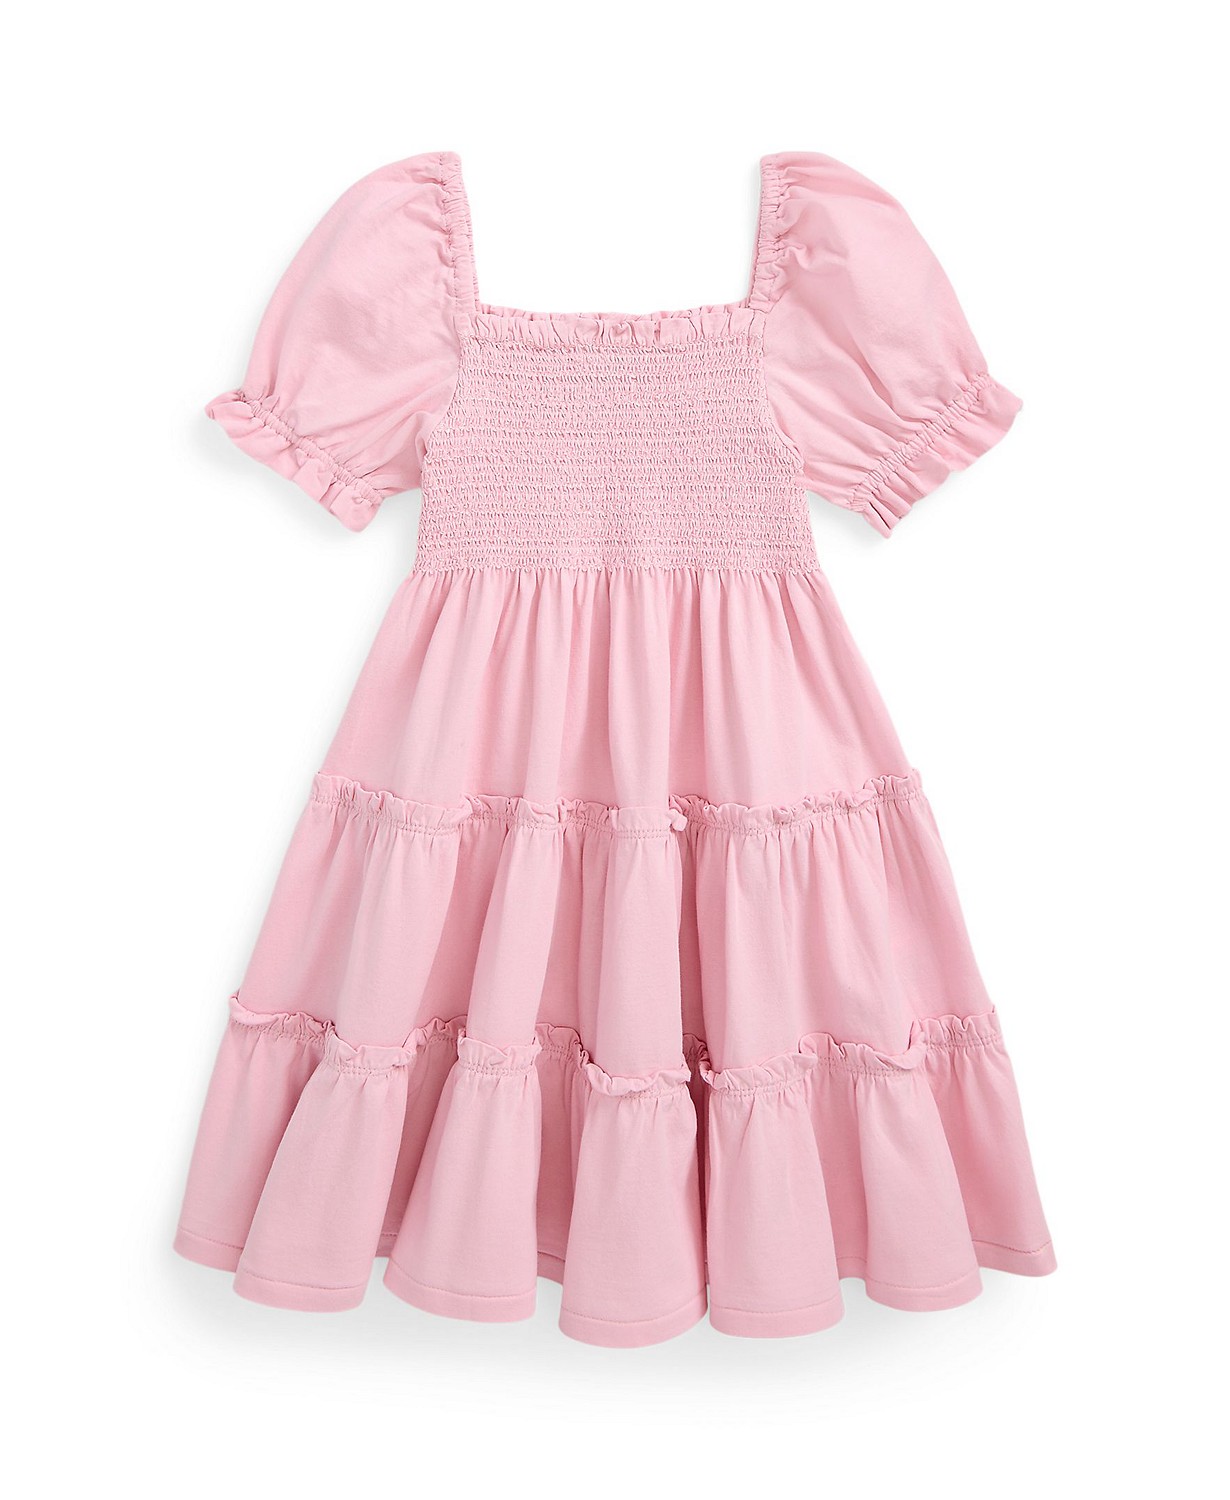 Toddler and Little Girls Smocked Cotton Jersey Dress